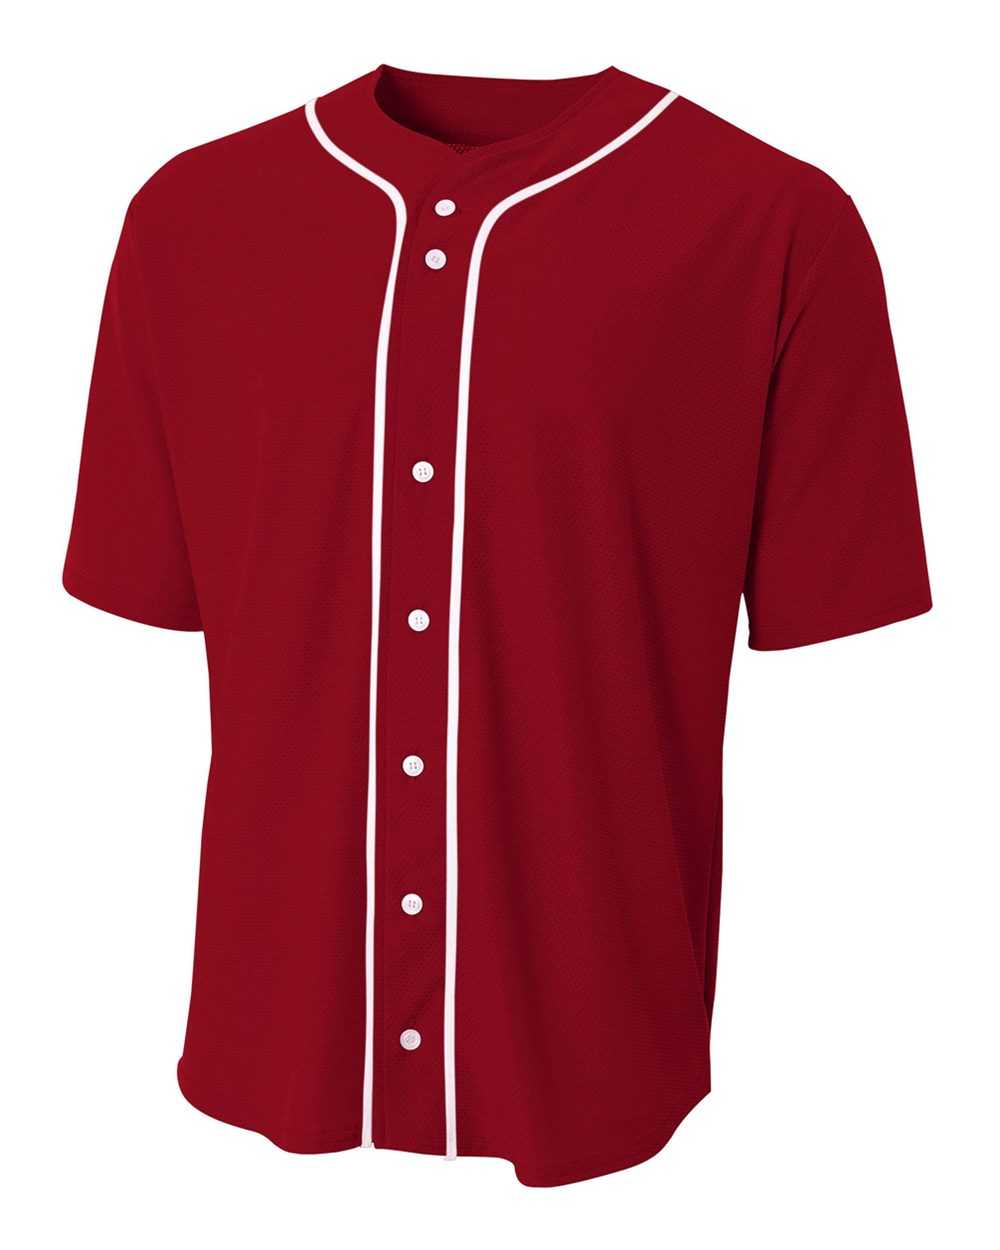 A4 NB4184 Youth Full Button Stretch Mesh Baseball Jersey - Cardinal White - HIT a Double